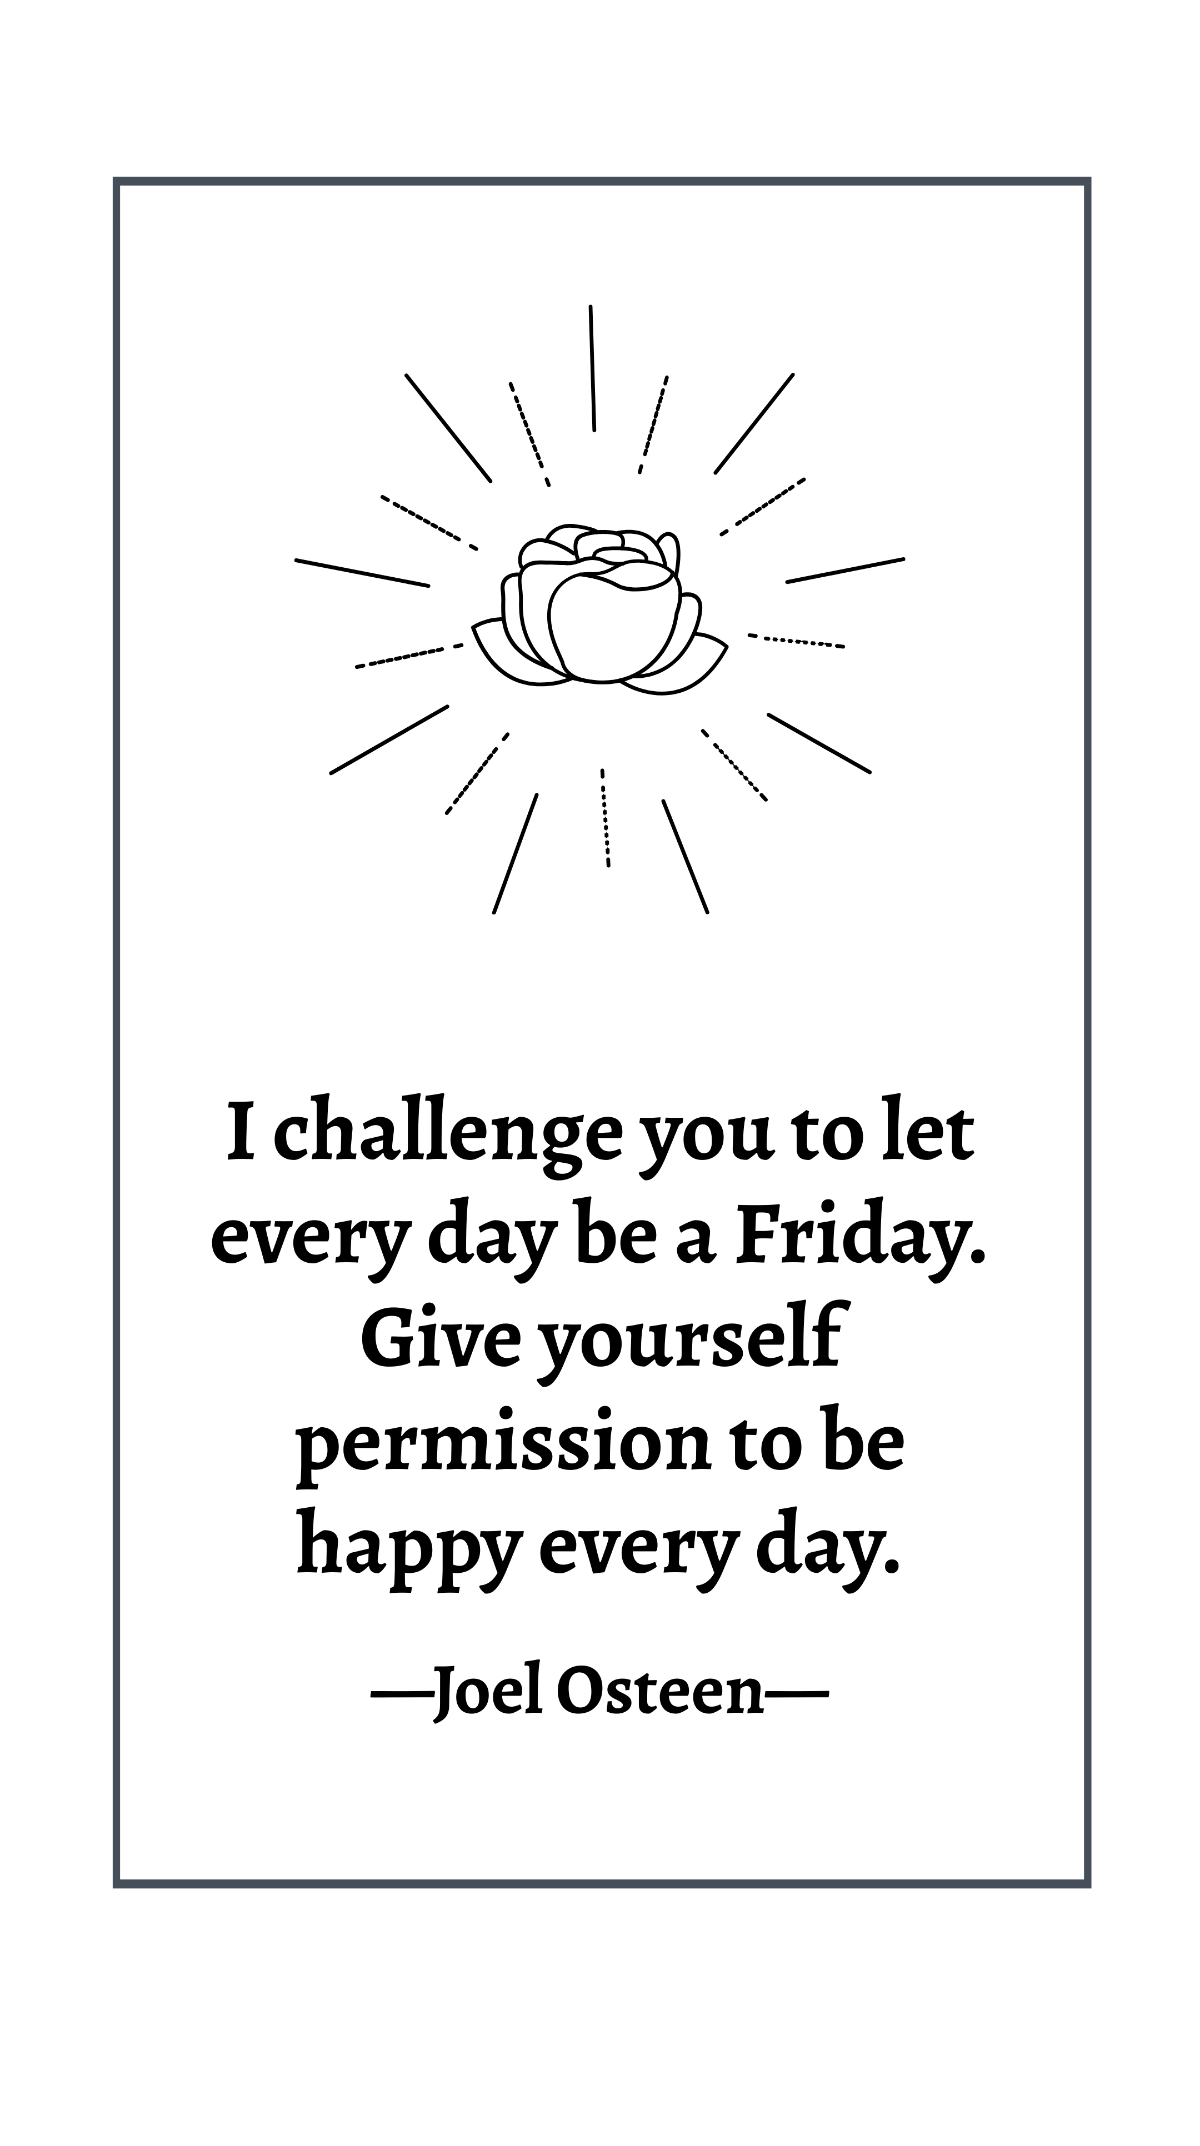 Free Joel Osteen - I challenge you to let every day be a Friday. Give yourself permission to be happy every day. Template